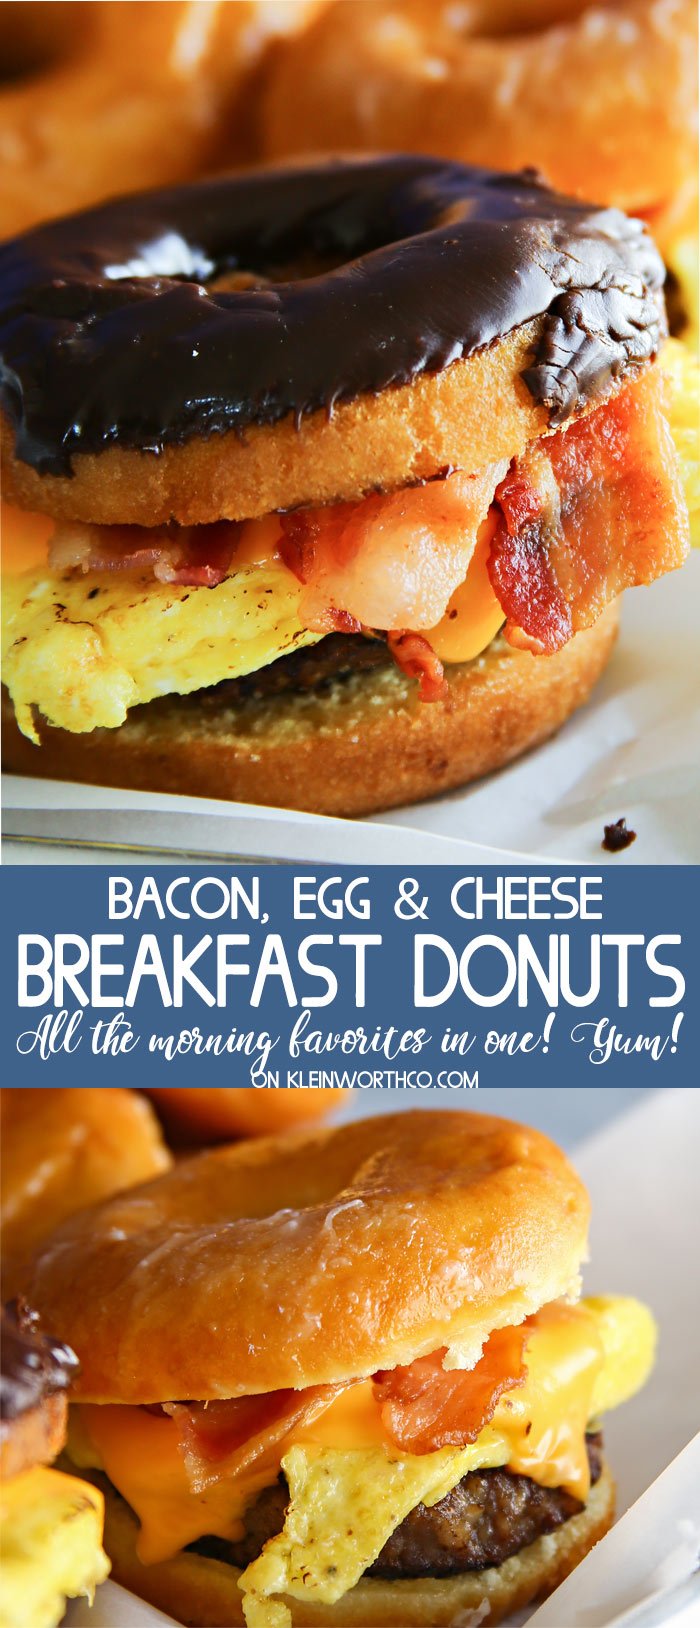 Bacon, Egg & Cheese Breakfast Donuts